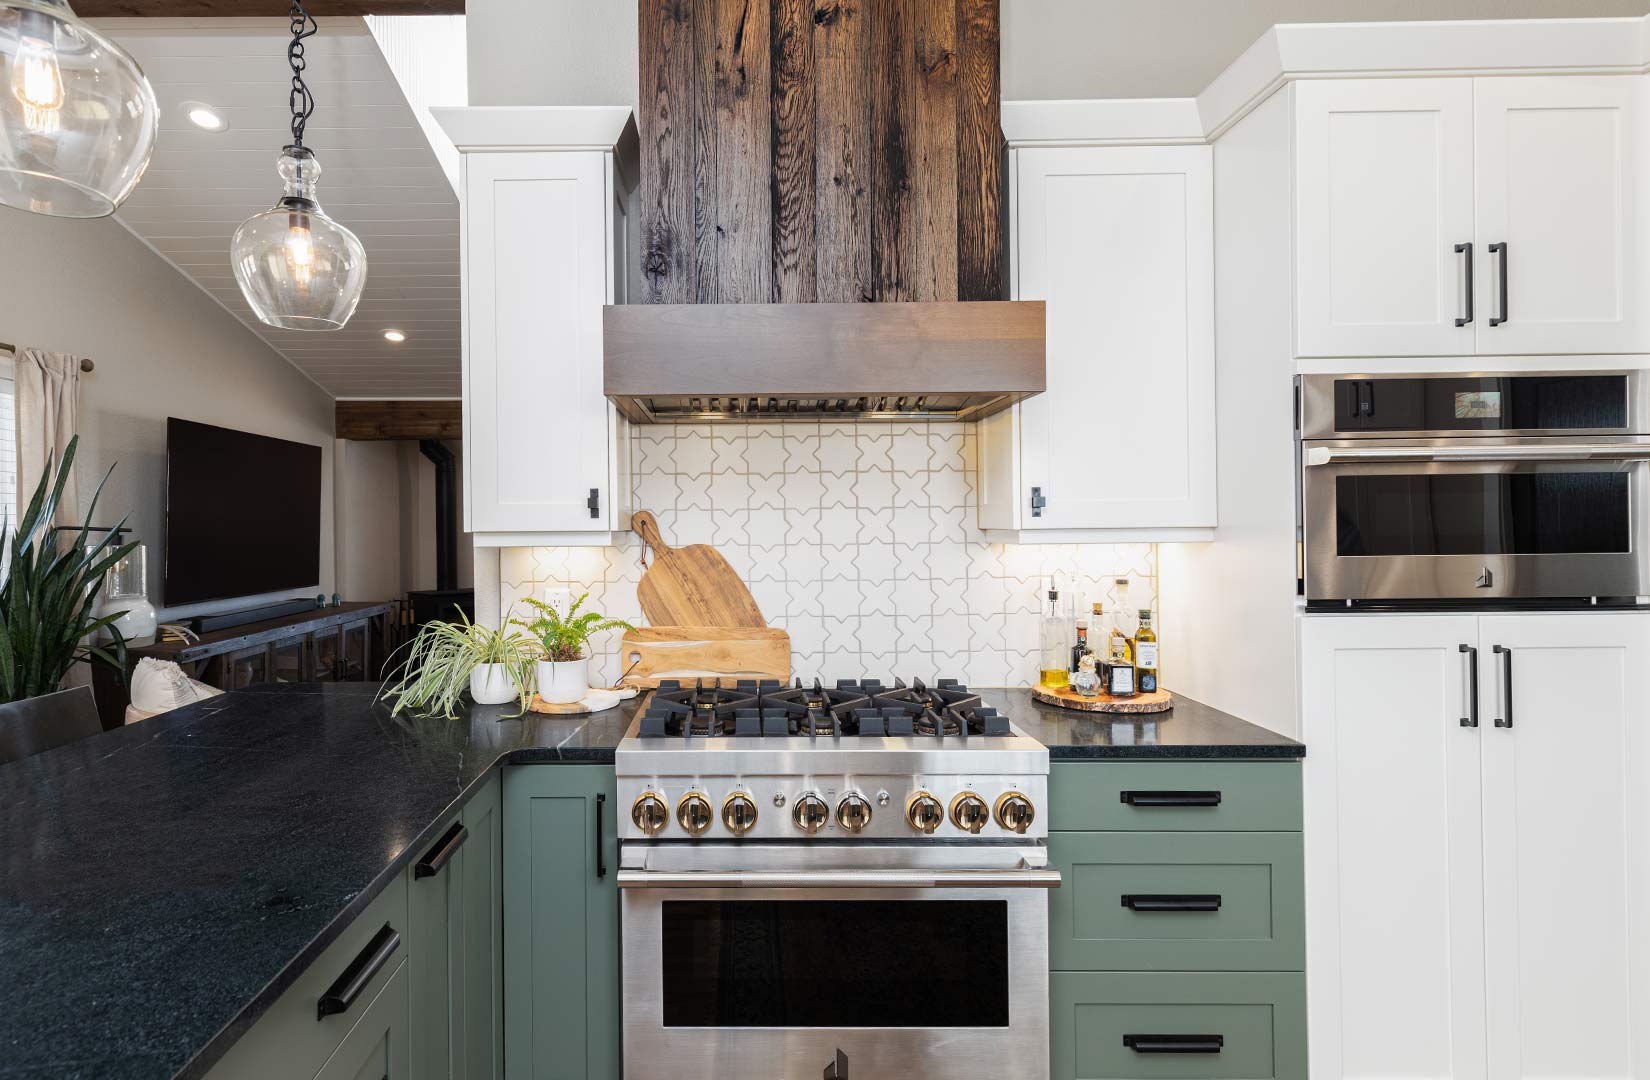 Industrial farmhouse style vent hood is featured over a modern stove with farmhouse style pendant lights picked out by Freestone Design-Build in Fort Collins Colorado.